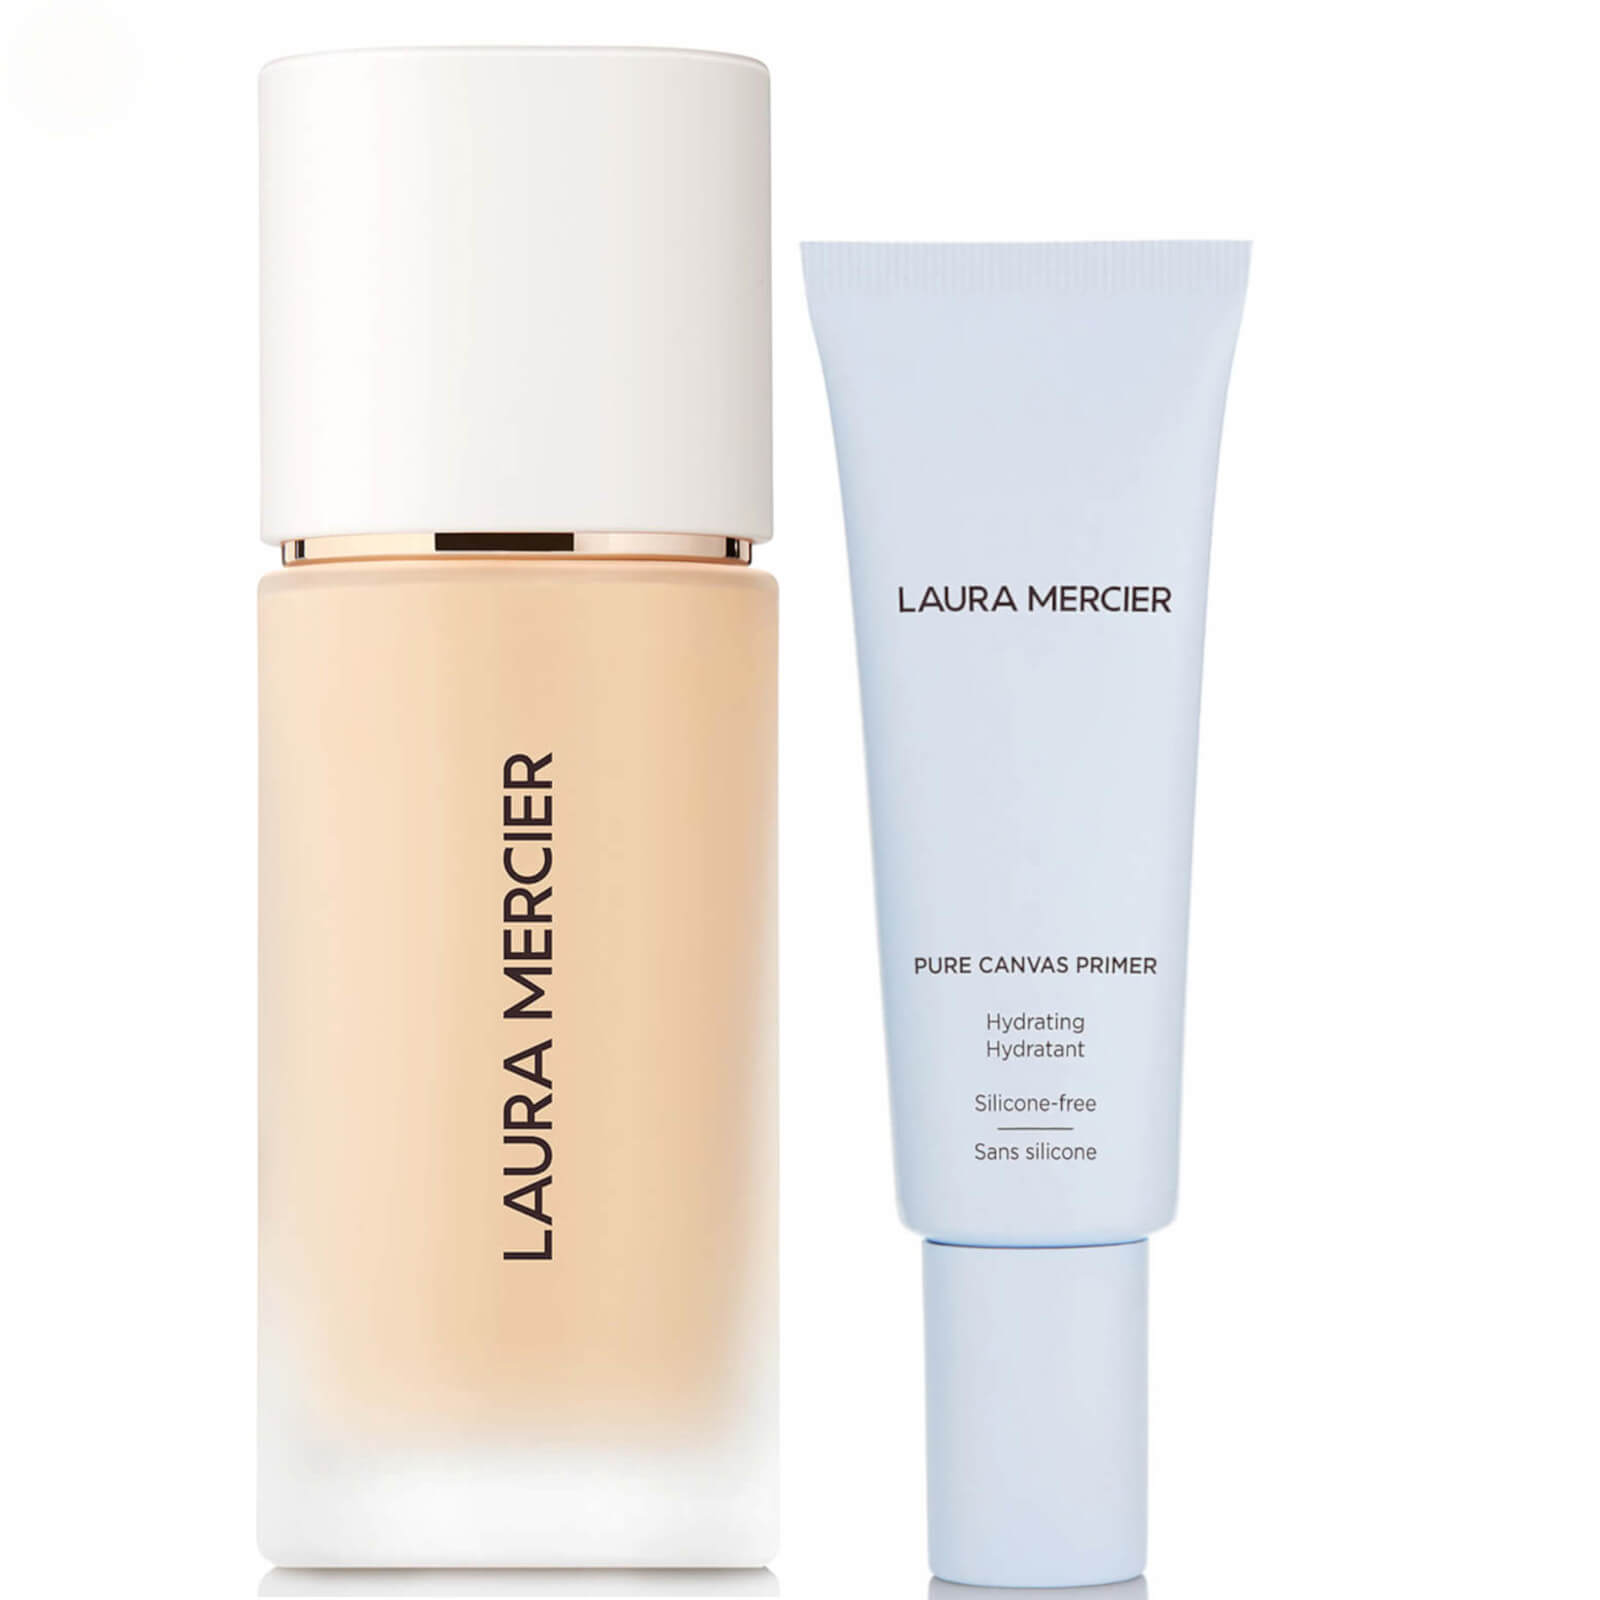 Laura Mercier Real Flawless Foundation and Pure Canvas Hydrating Primer Bundle (Various Shades) - 0W